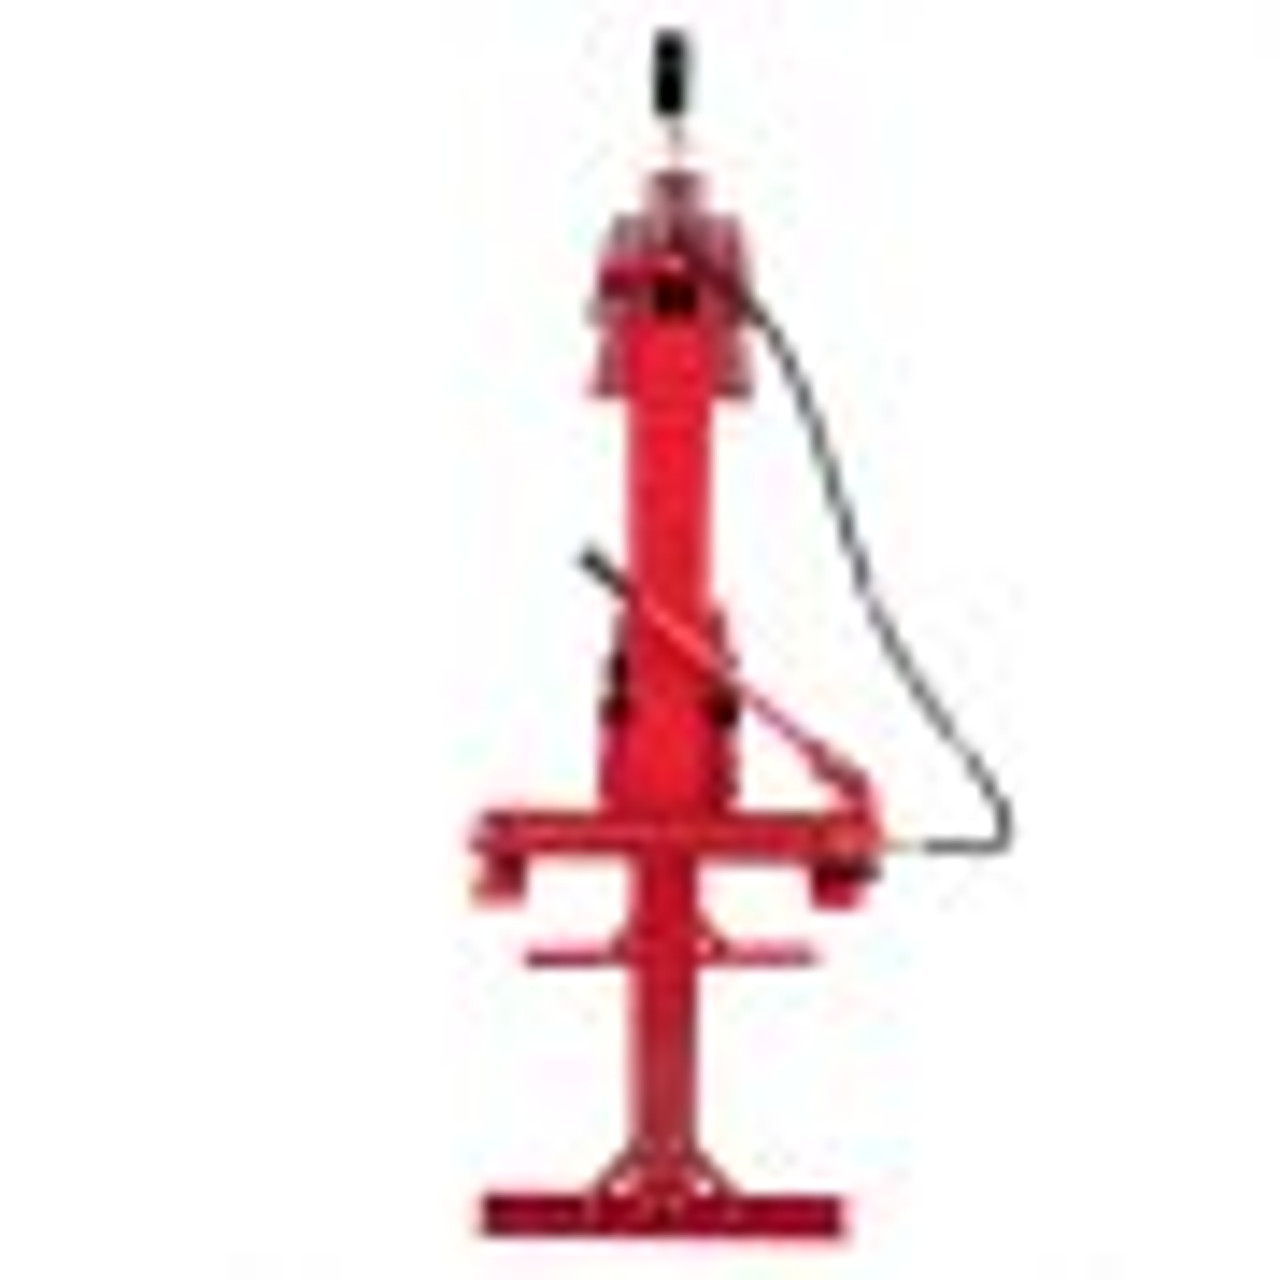 Hydraulic Press 20 Ton Hydraulic Shop Floor Press 44000 lb w/ with Heavy Duty Steel Plates and H Frame Working Distance 41"(104cm) Top Mount for Gears and Bearings